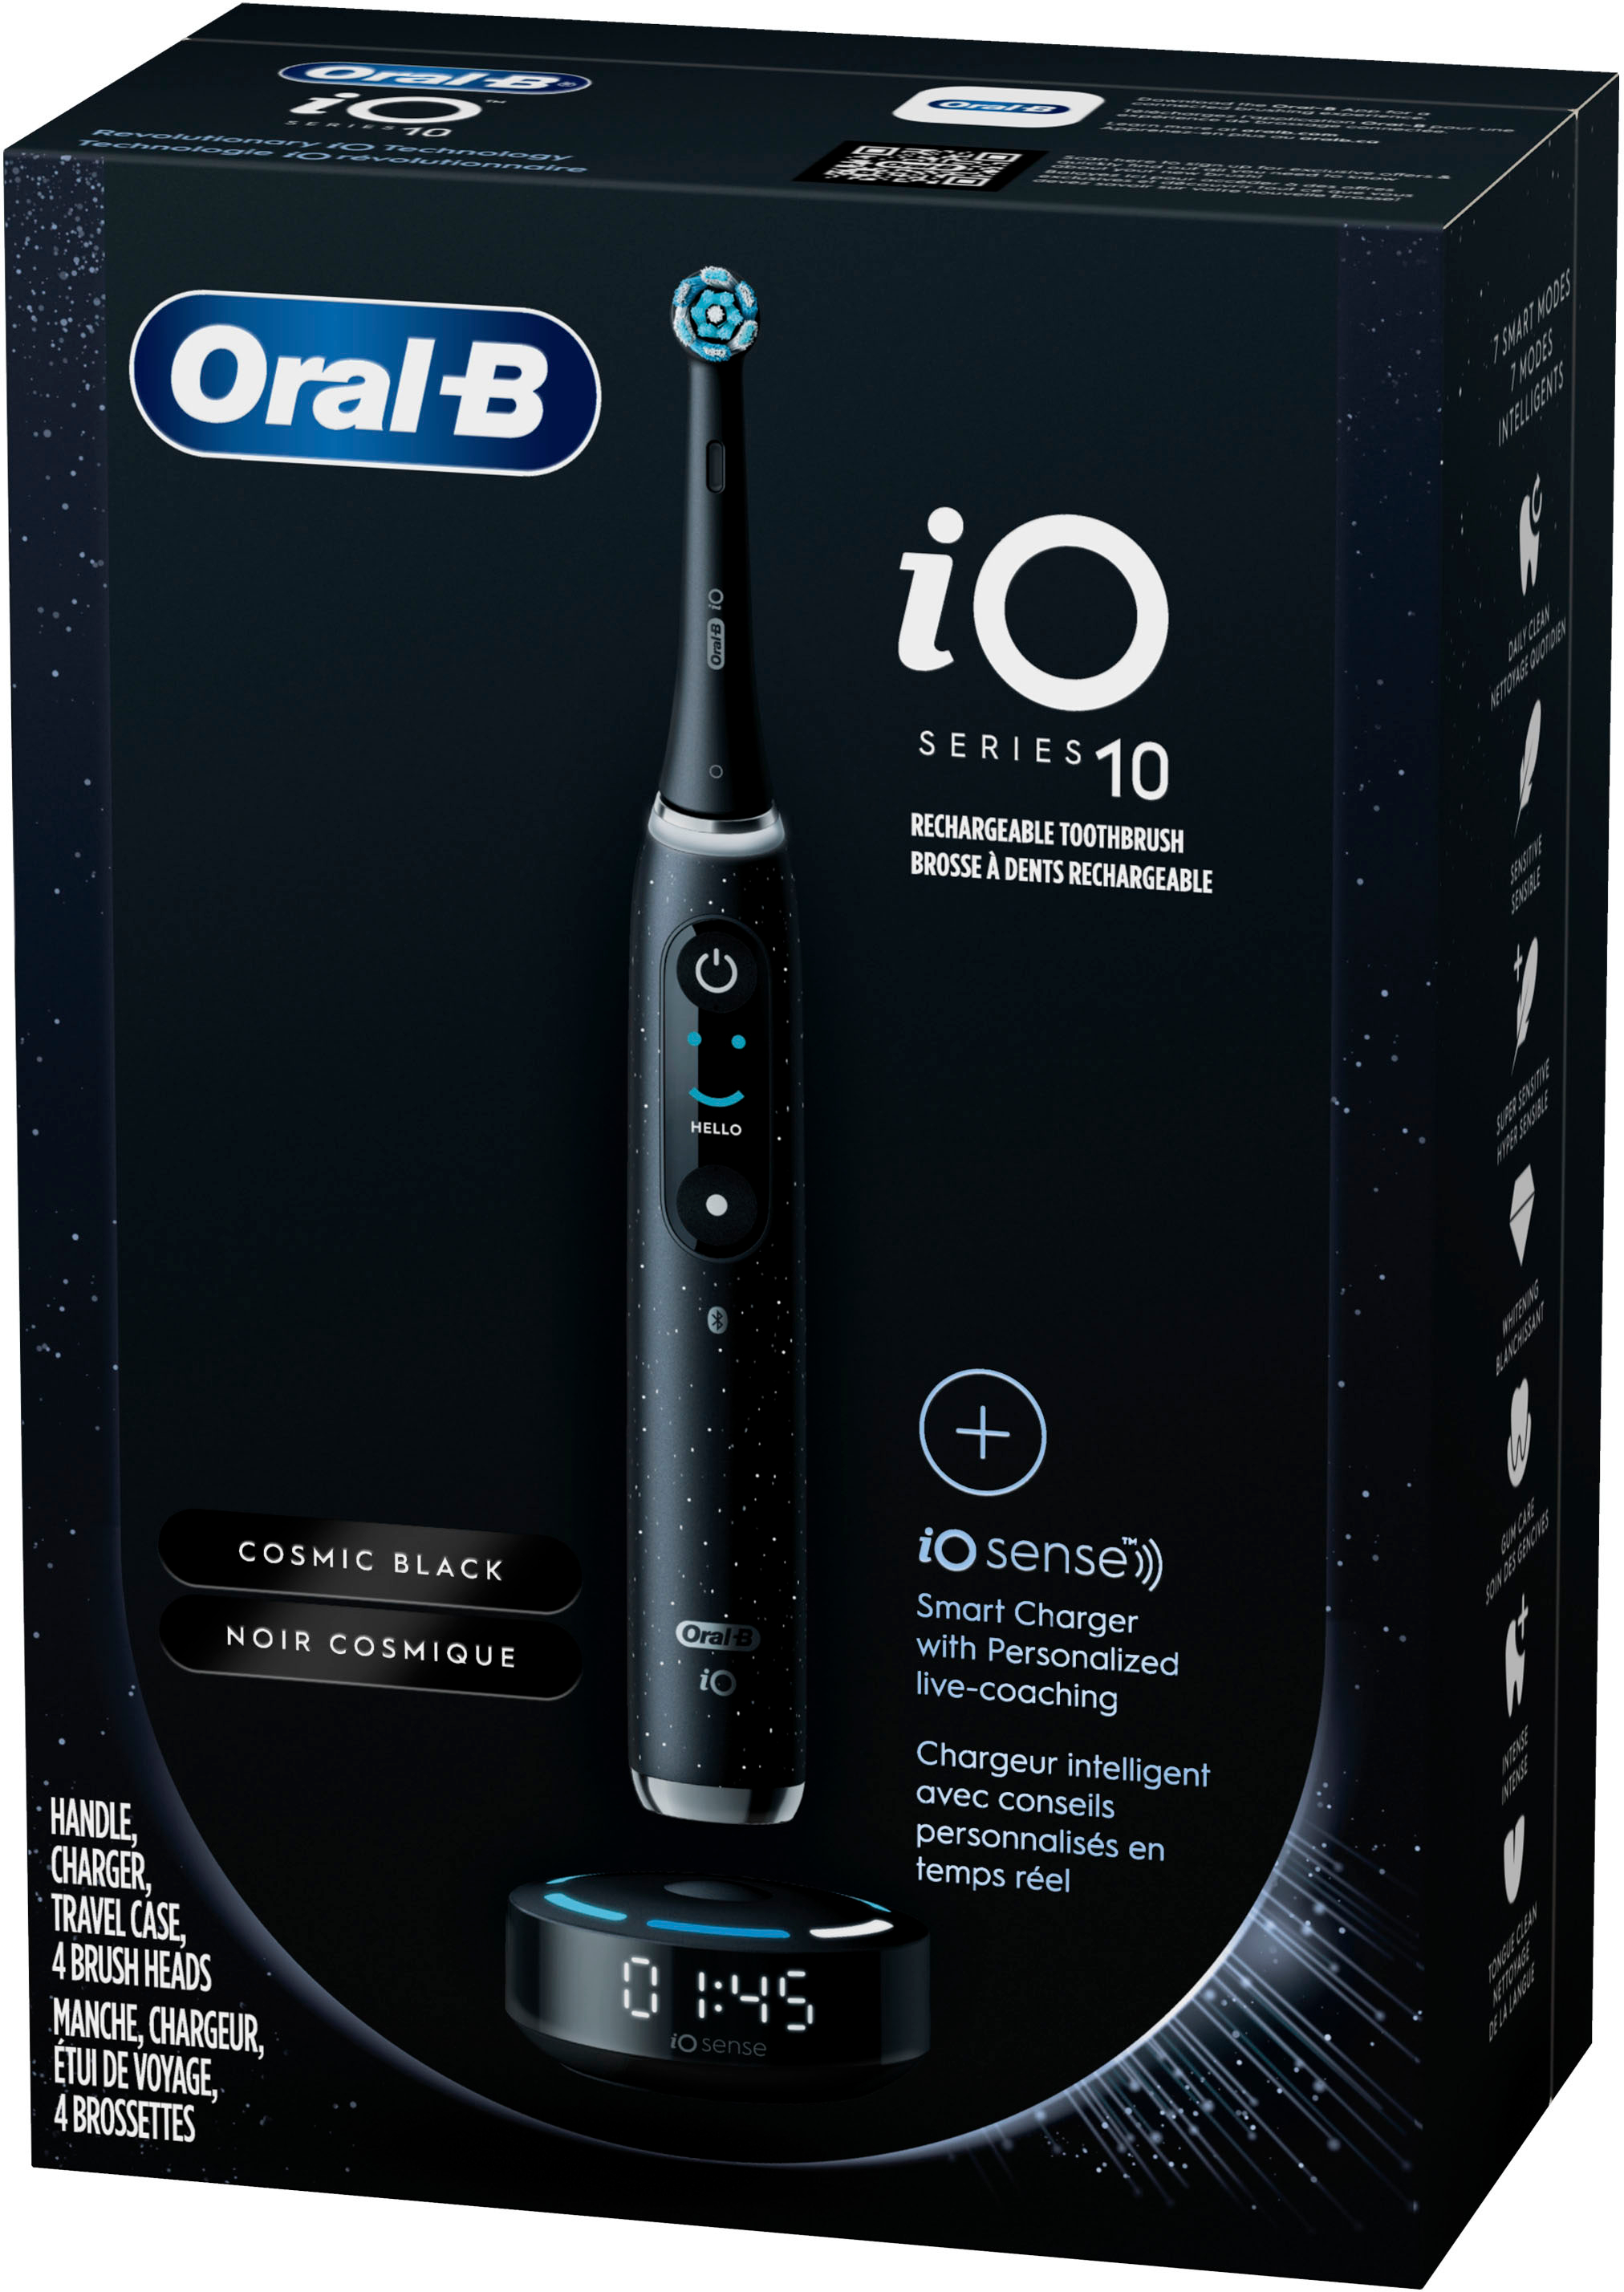 Oral-B - IO Series 10 Rechargeable Electric Toothbrush - Black